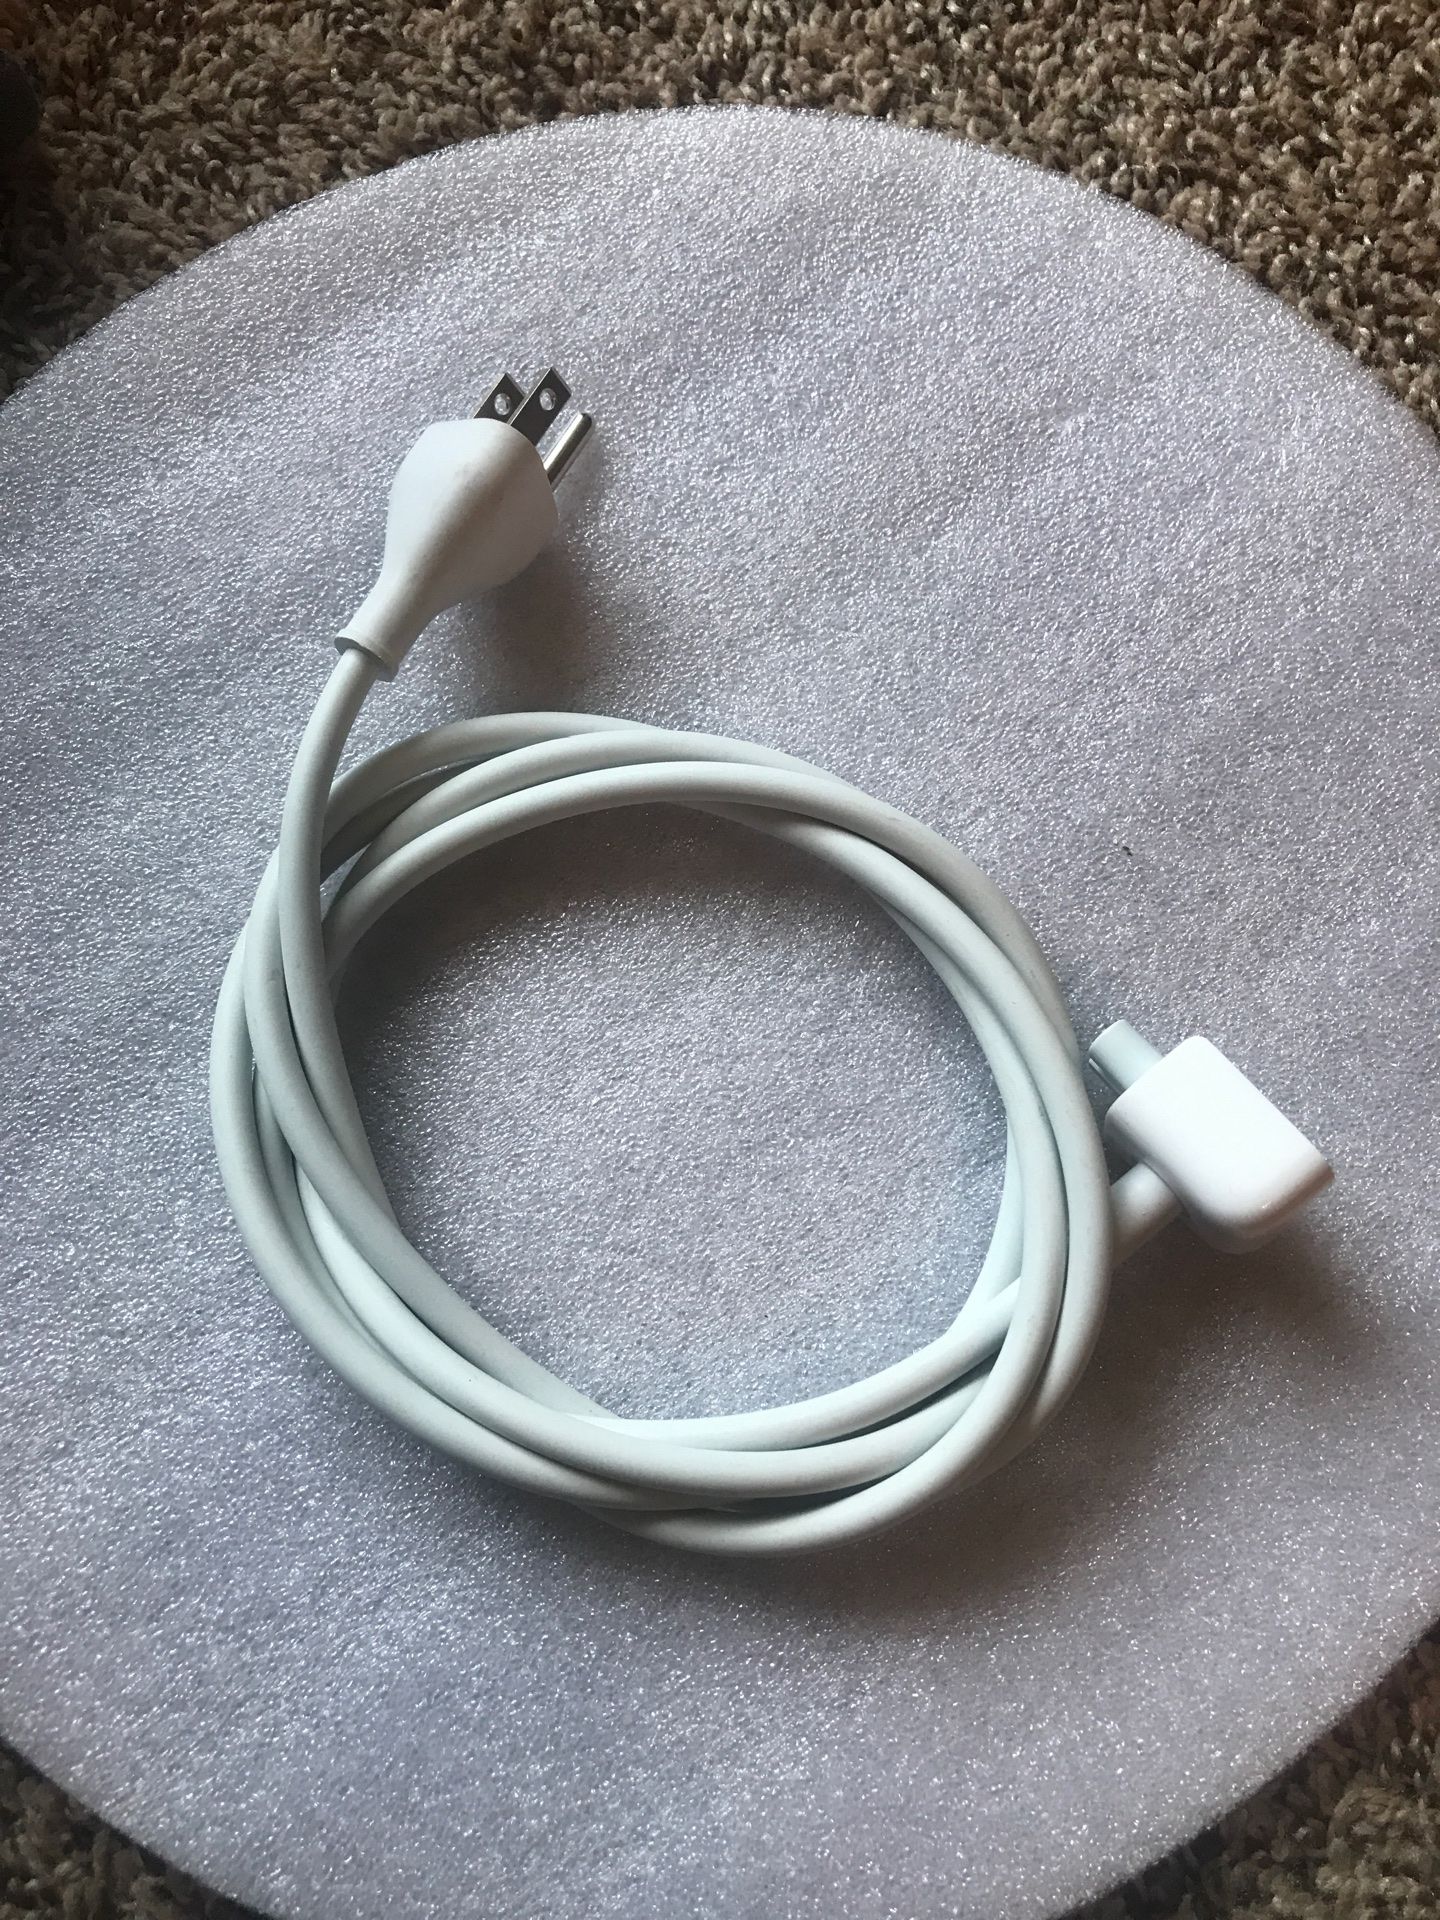 Apple extended power cord